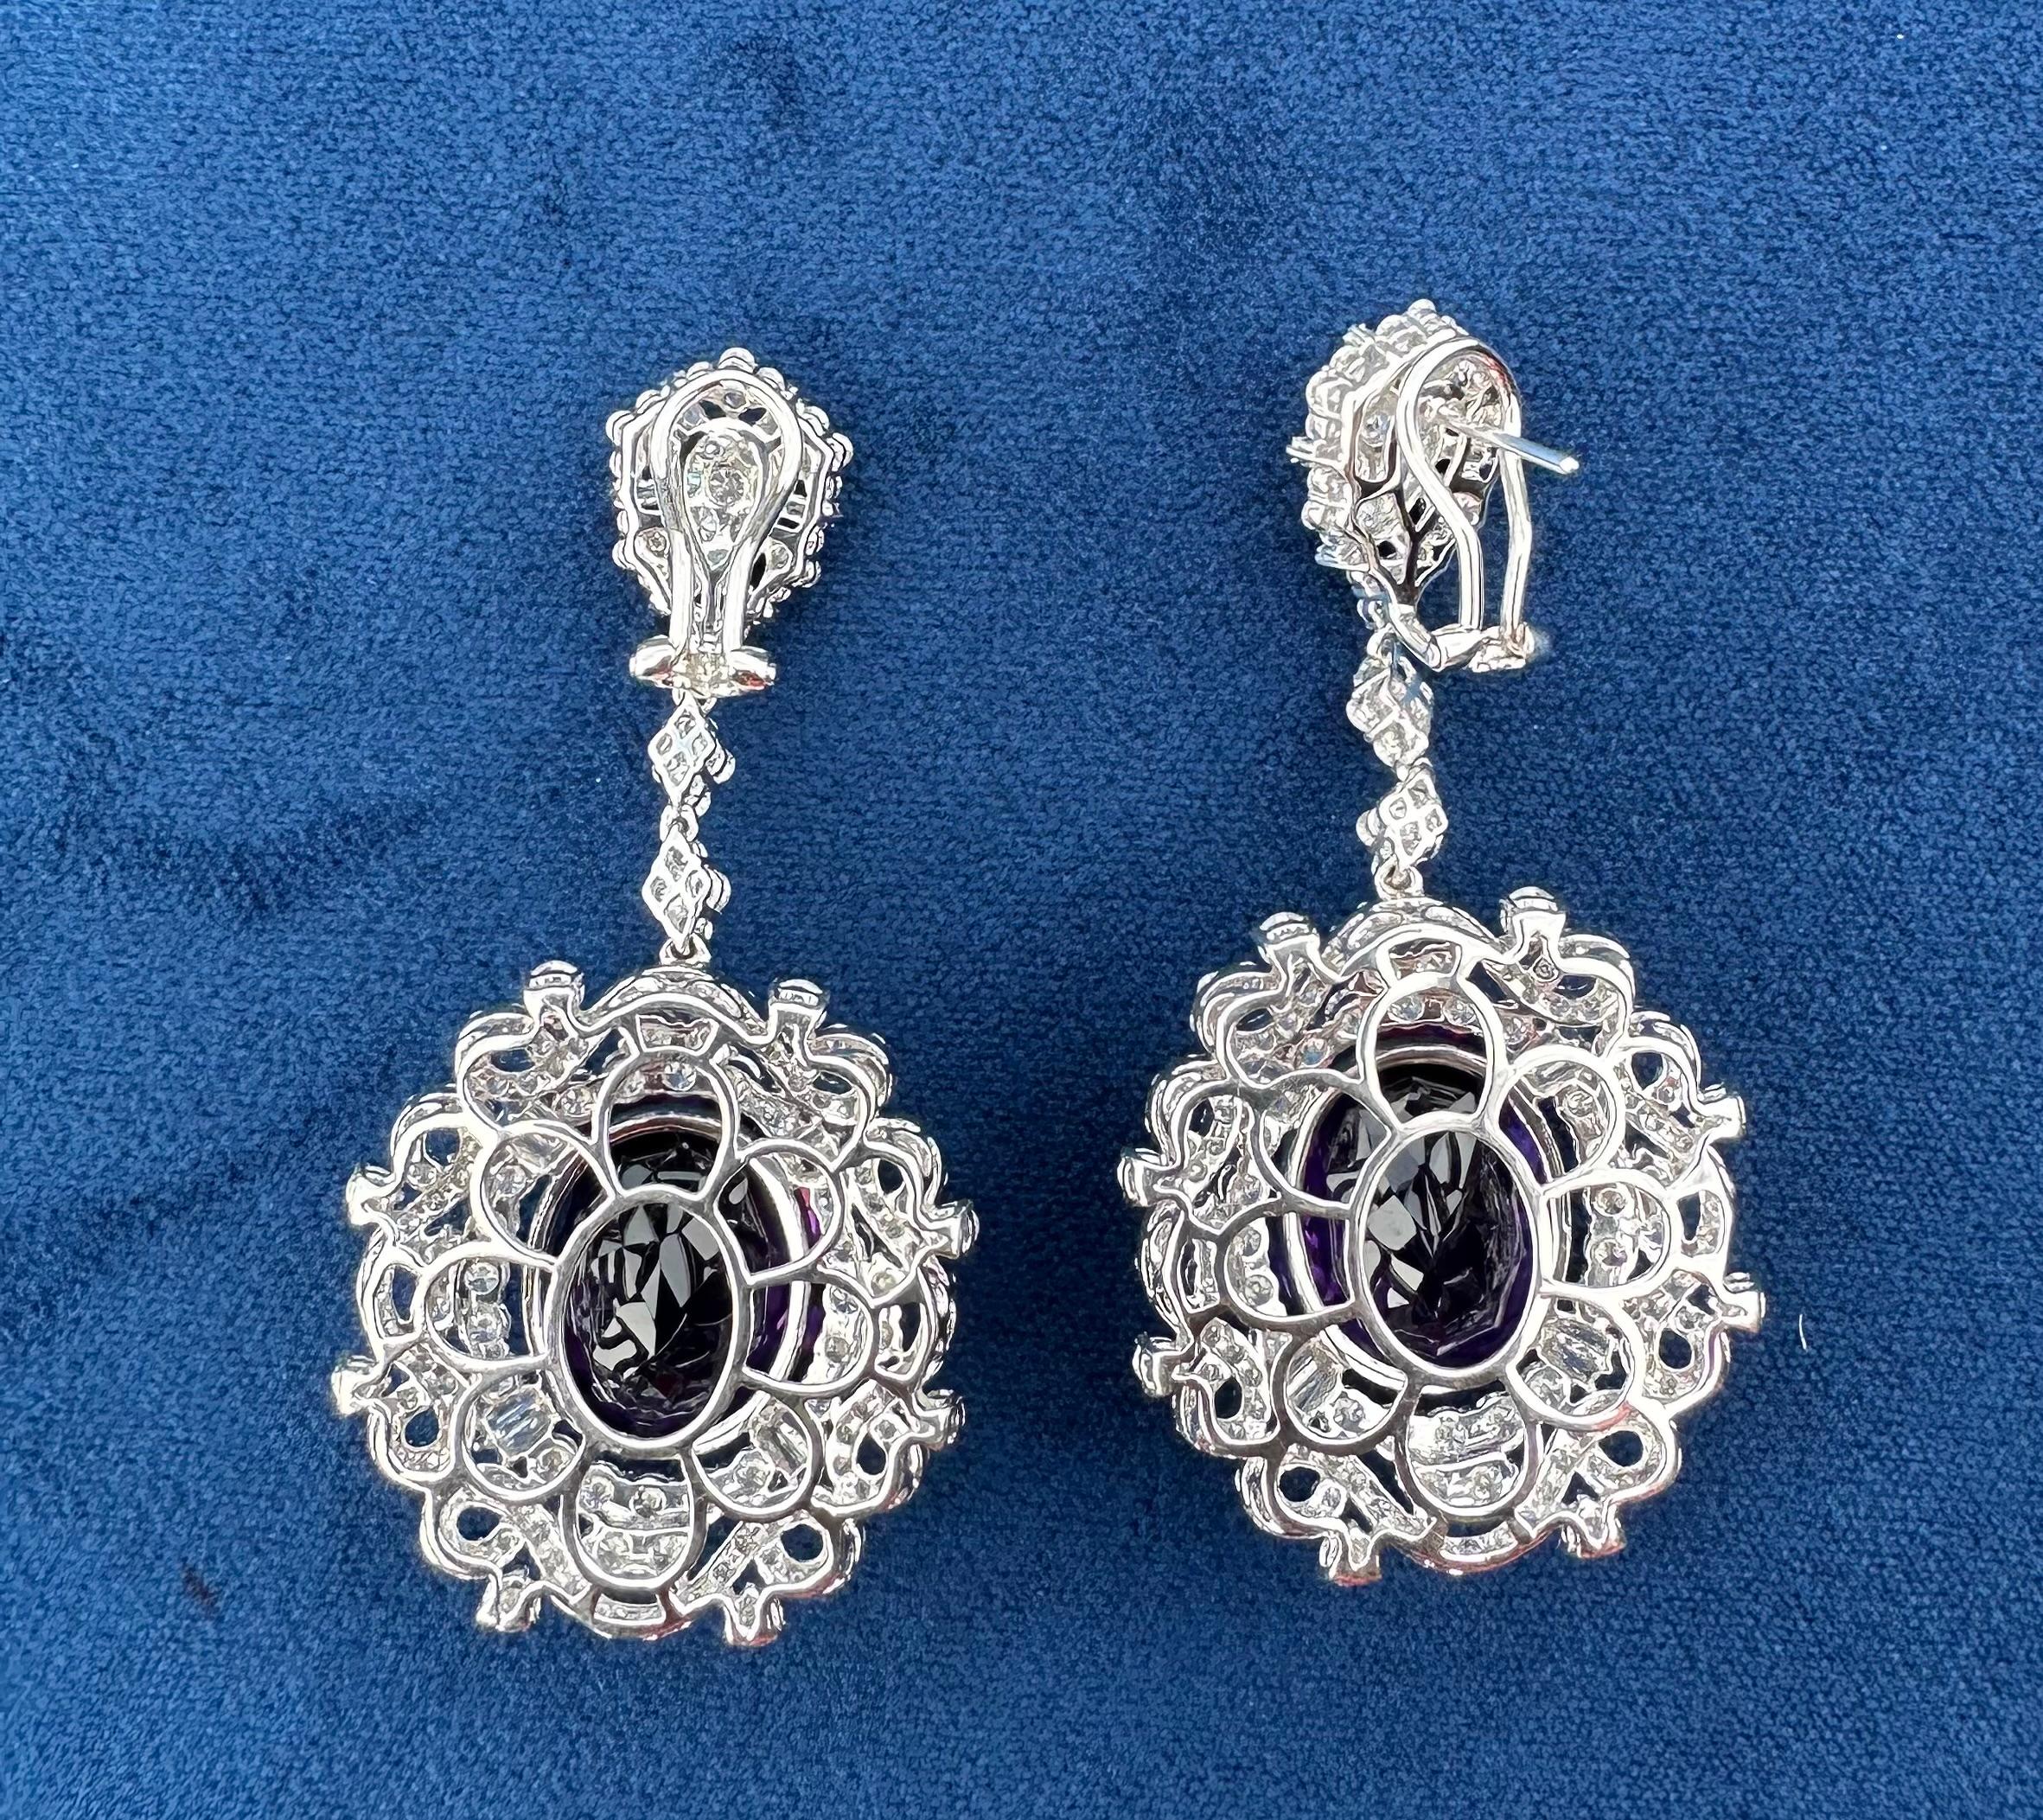 Exquisite Pair of 42.49 Carat Amethyst and Diamond 18K White Gold Earrings For Sale 2